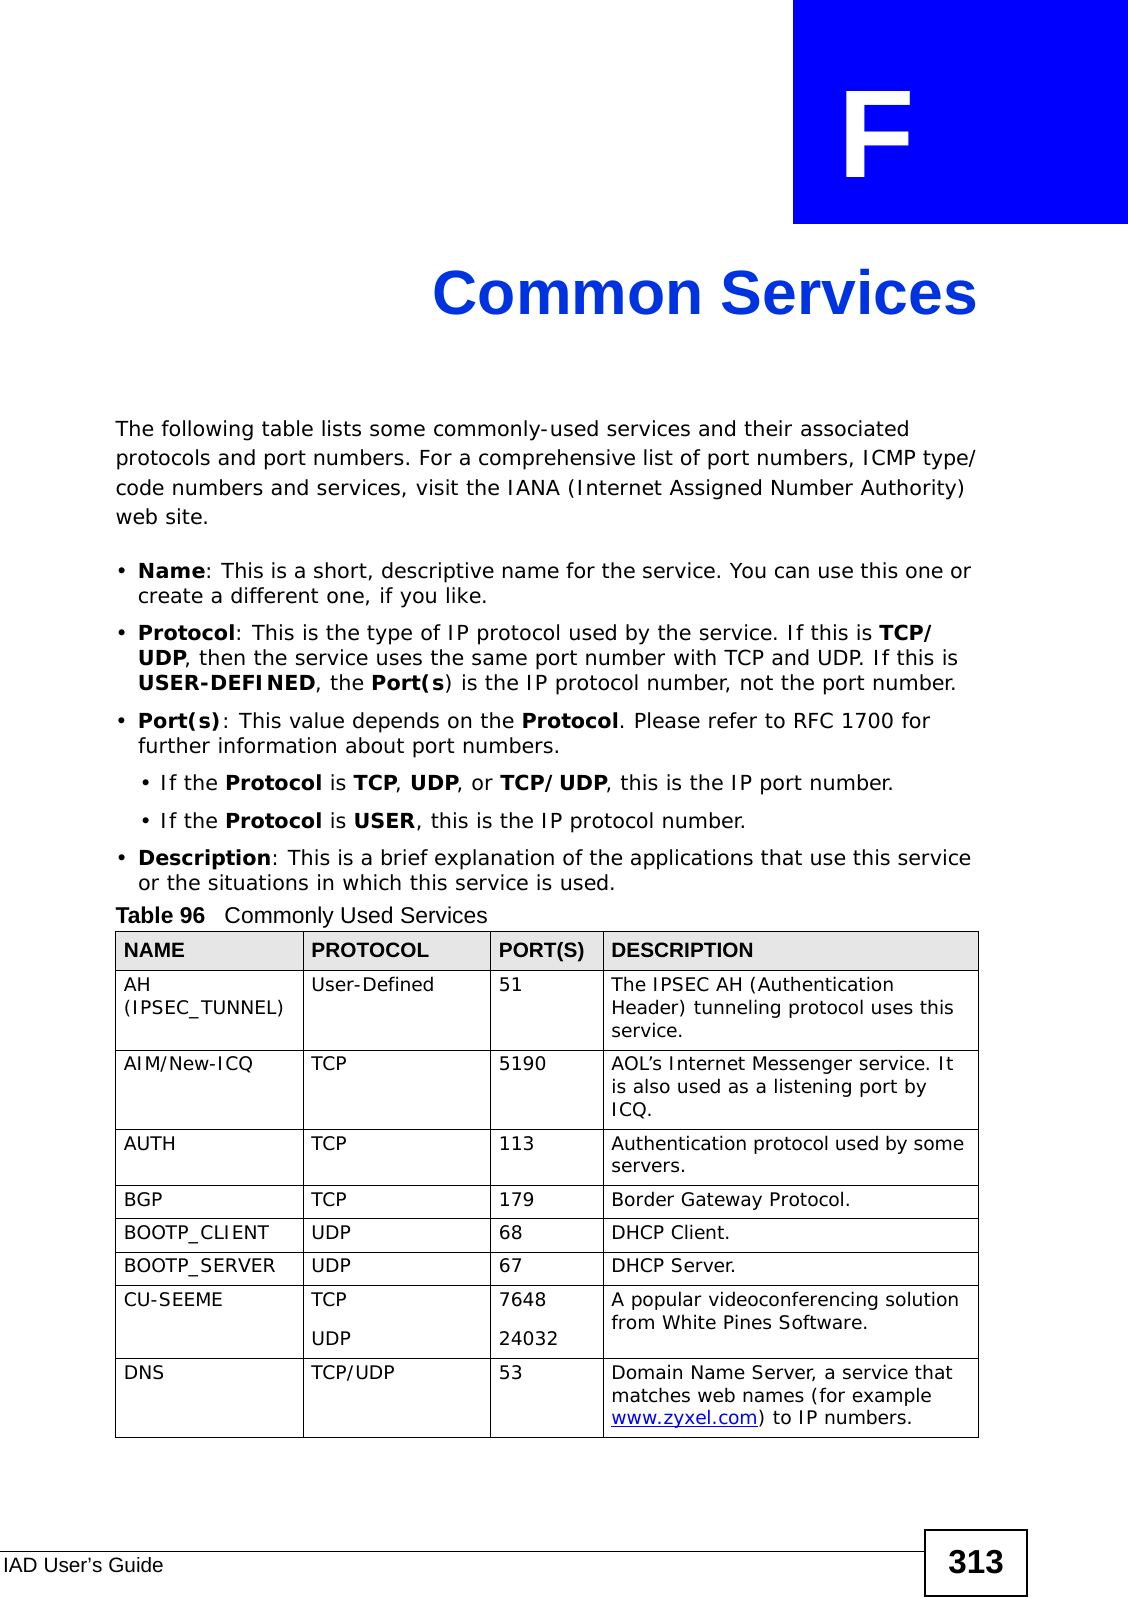 IAD User’s Guide 313APPENDIX  F Common ServicesThe following table lists some commonly-used services and their associated protocols and port numbers. For a comprehensive list of port numbers, ICMP type/code numbers and services, visit the IANA (Internet Assigned Number Authority) web site. •Name: This is a short, descriptive name for the service. You can use this one or create a different one, if you like.•Protocol: This is the type of IP protocol used by the service. If this is TCP/UDP, then the service uses the same port number with TCP and UDP. If this is USER-DEFINED, the Port(s) is the IP protocol number, not the port number.•Port(s): This value depends on the Protocol. Please refer to RFC 1700 for further information about port numbers.•If the Protocol is TCP, UDP, or TCP/UDP, this is the IP port number.•If the Protocol is USER, this is the IP protocol number.•Description: This is a brief explanation of the applications that use this service or the situations in which this service is used.Table 96   Commonly Used ServicesNAME PROTOCOL PORT(S) DESCRIPTIONAH (IPSEC_TUNNEL) User-Defined 51 The IPSEC AH (Authentication Header) tunneling protocol uses this service.AIM/New-ICQ TCP 5190 AOL’s Internet Messenger service. It is also used as a listening port by ICQ.AUTH TCP 113 Authentication protocol used by some servers.BGP TCP 179 Border Gateway Protocol.BOOTP_CLIENT UDP 68 DHCP Client.BOOTP_SERVER UDP 67 DHCP Server.CU-SEEME TCPUDP764824032A popular videoconferencing solution from White Pines Software.DNS TCP/UDP 53 Domain Name Server, a service that matches web names (for example www.zyxel.com) to IP numbers.